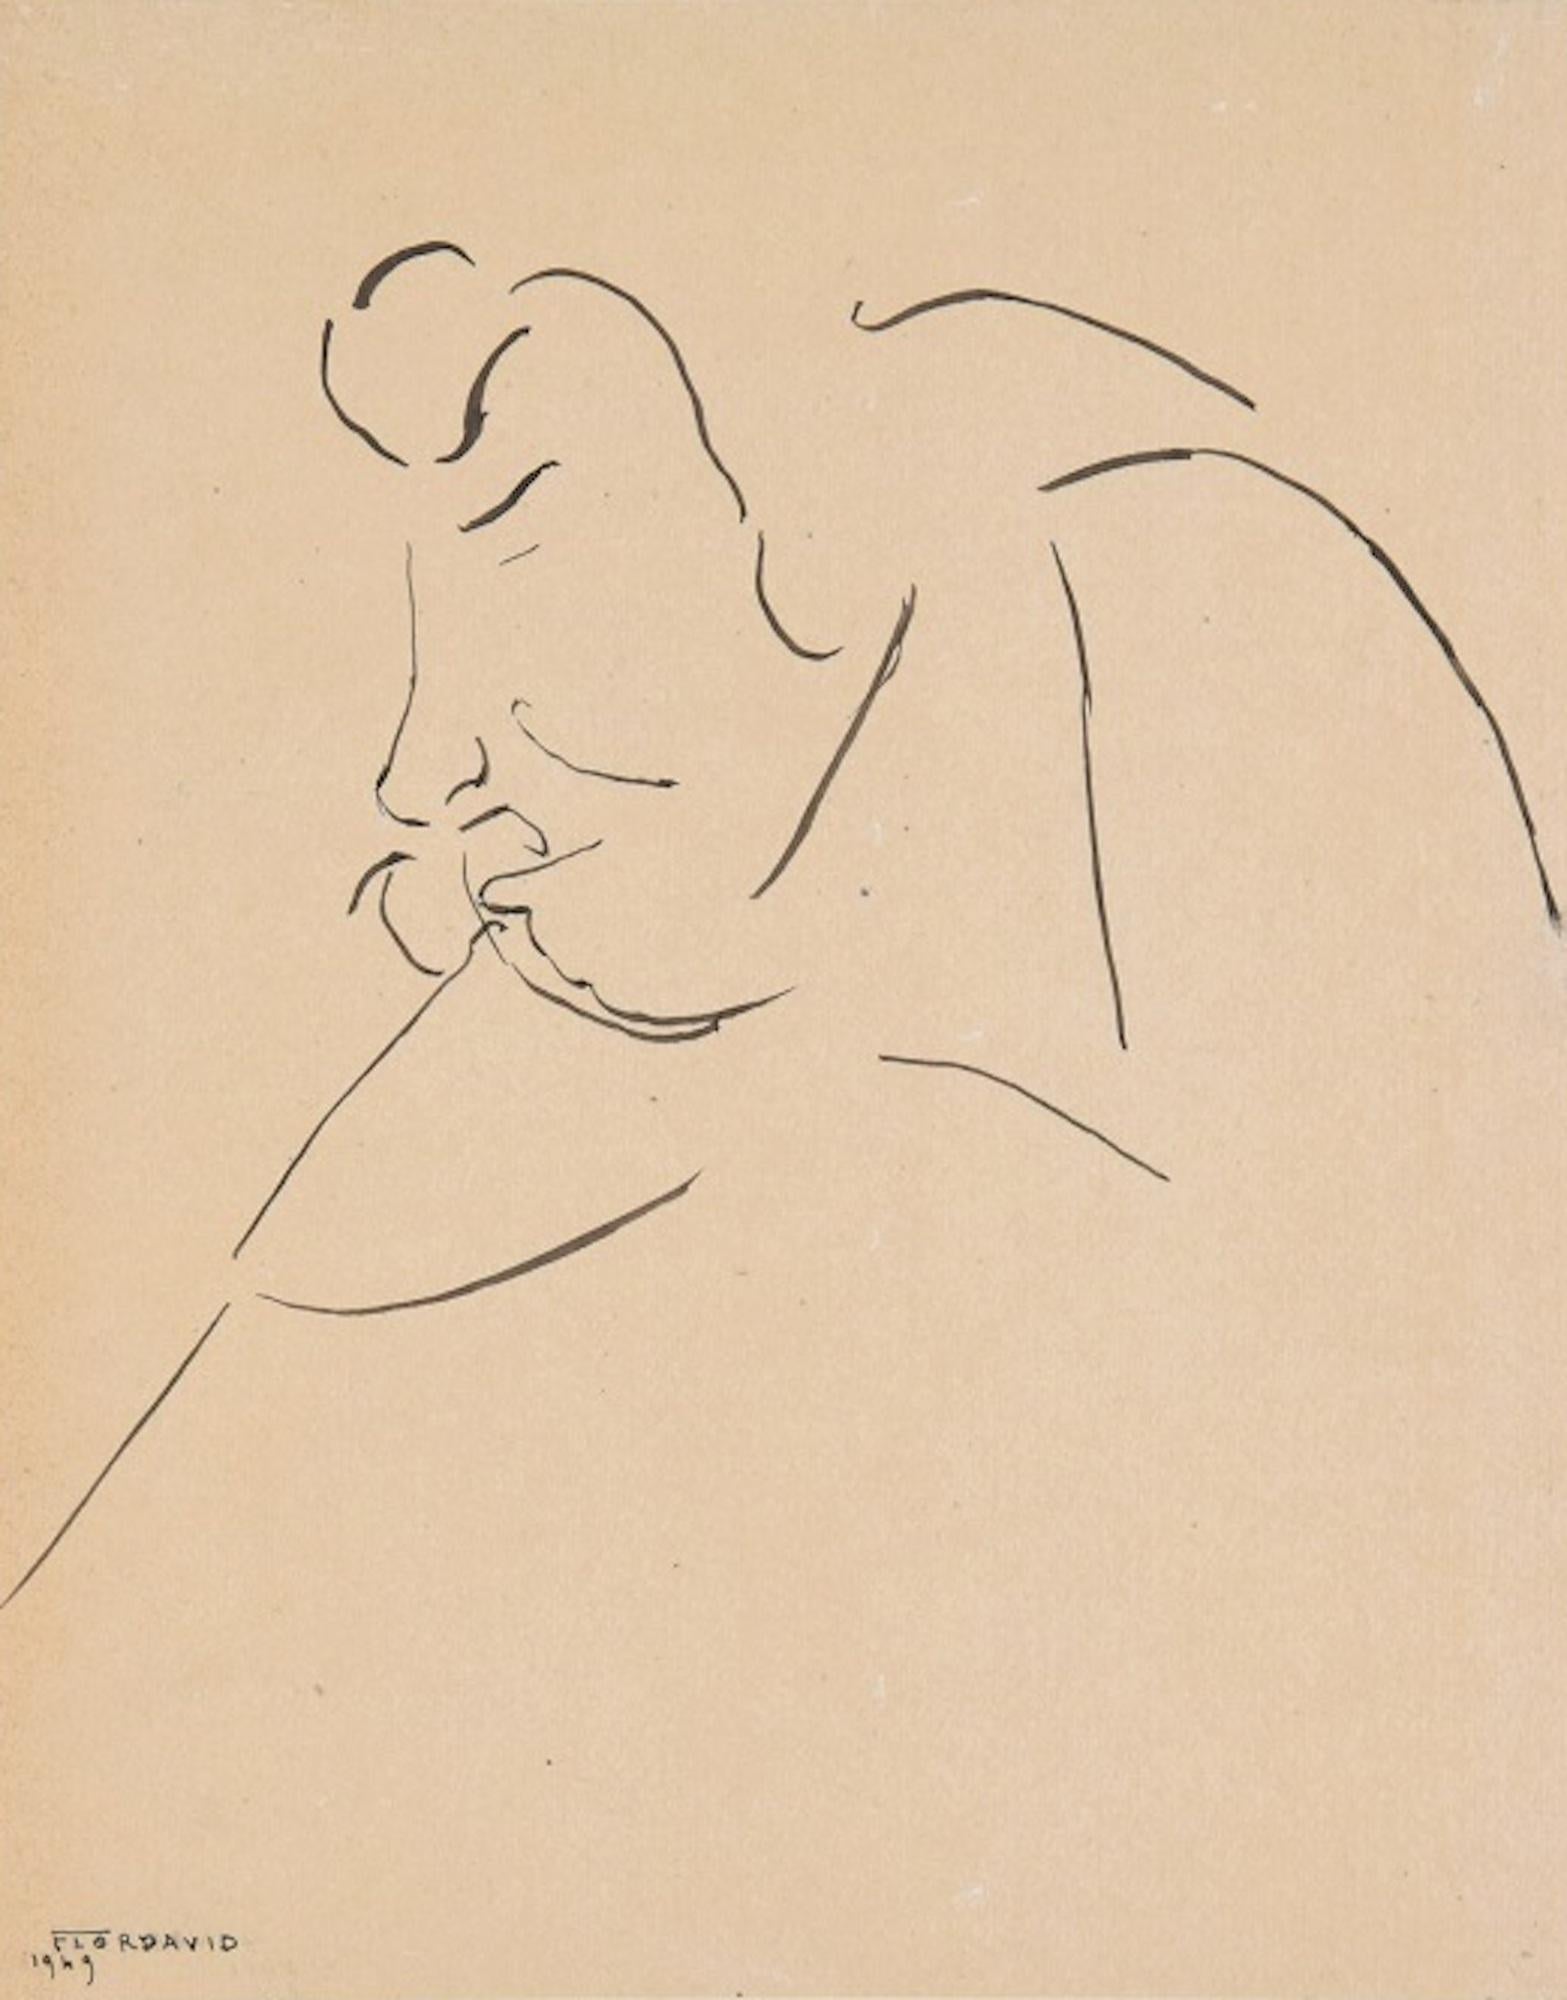 Tartuffe is an original drawing on ivory glossy paper realized by Flor David in 1949.

This is an original ink drawing representing a man in profile and in a meditative pose, portrayed witha very synthetic line and a wise touch.

Hand-signed and